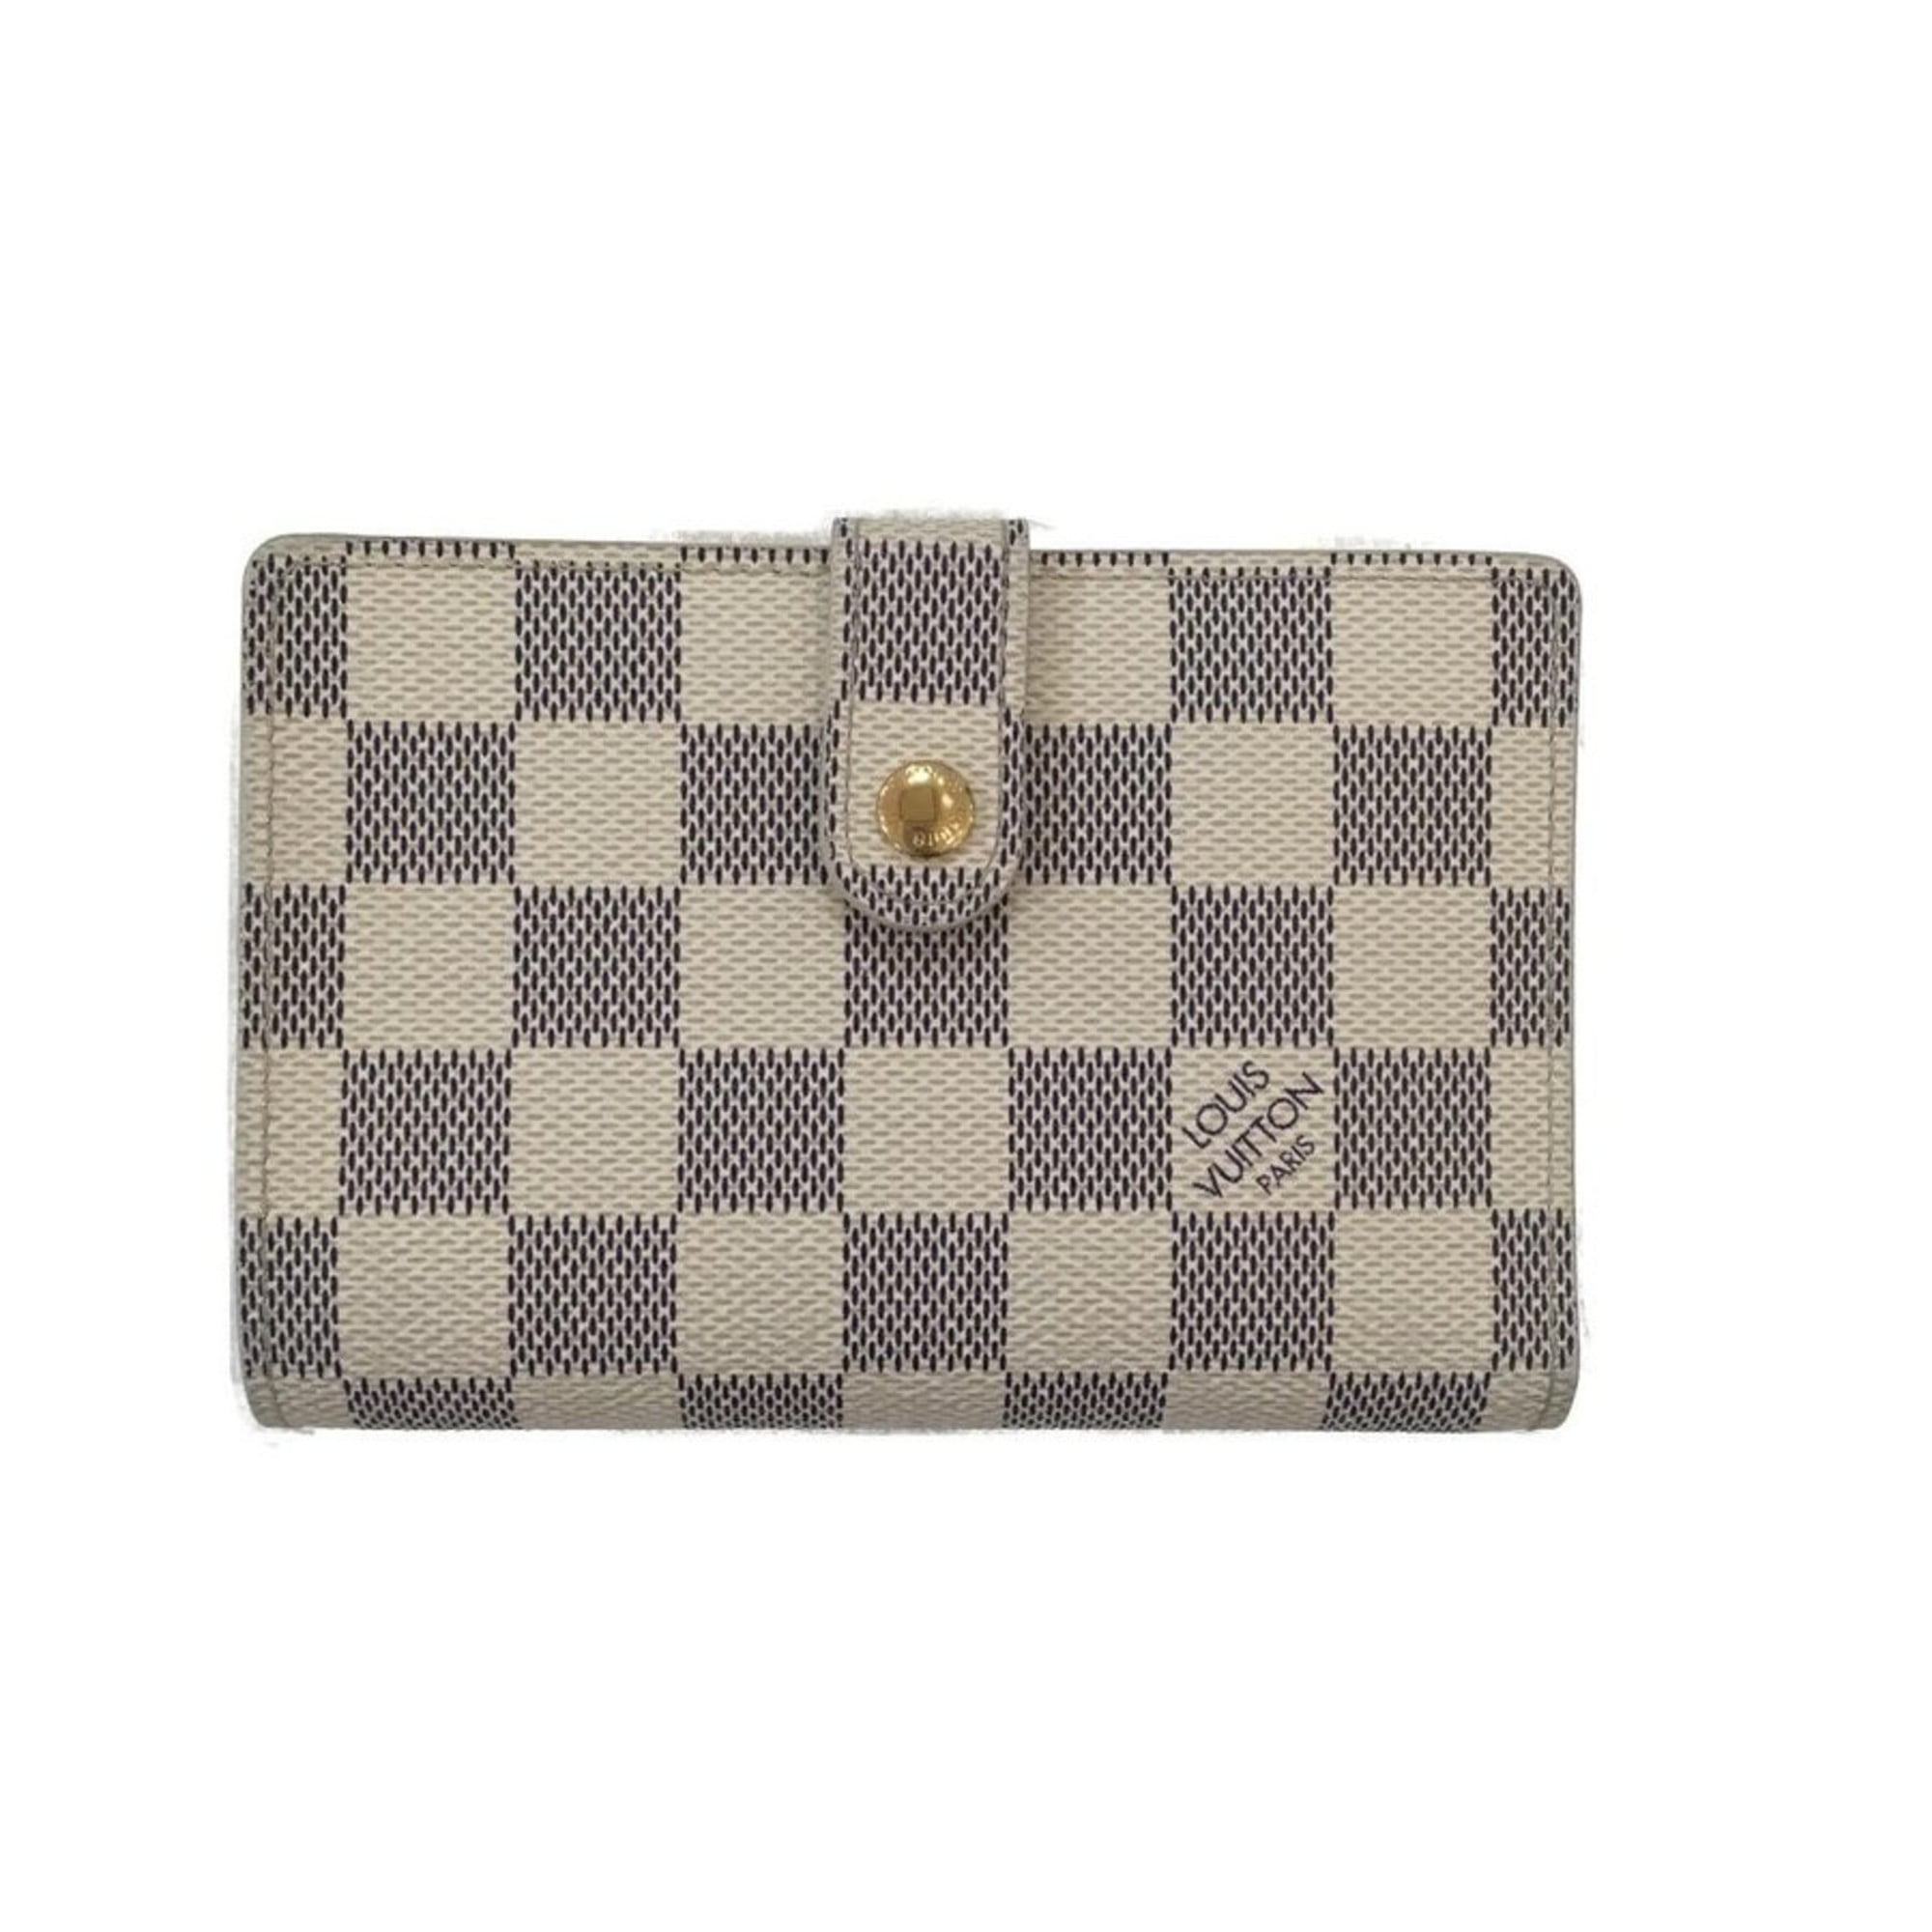 Louis Vuitton - Authenticated Wallet - White for Women, Very Good Condition